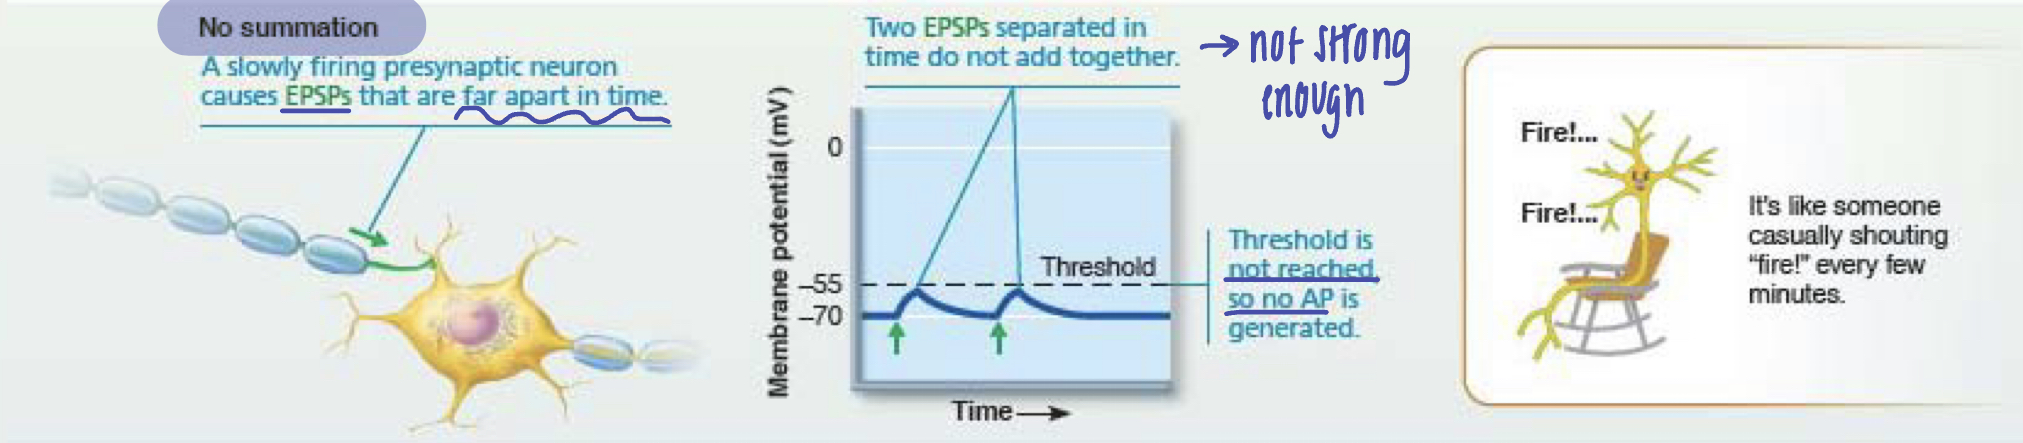 <p>presynaptic neuron causes EPSPs that are too far apart or too weak --&gt; they do not add together and is not strong enough --&gt; threshold is not reached, so no action potential is generated</p><p>signals summated --&gt; too weak/far --&gt; no fire</p>